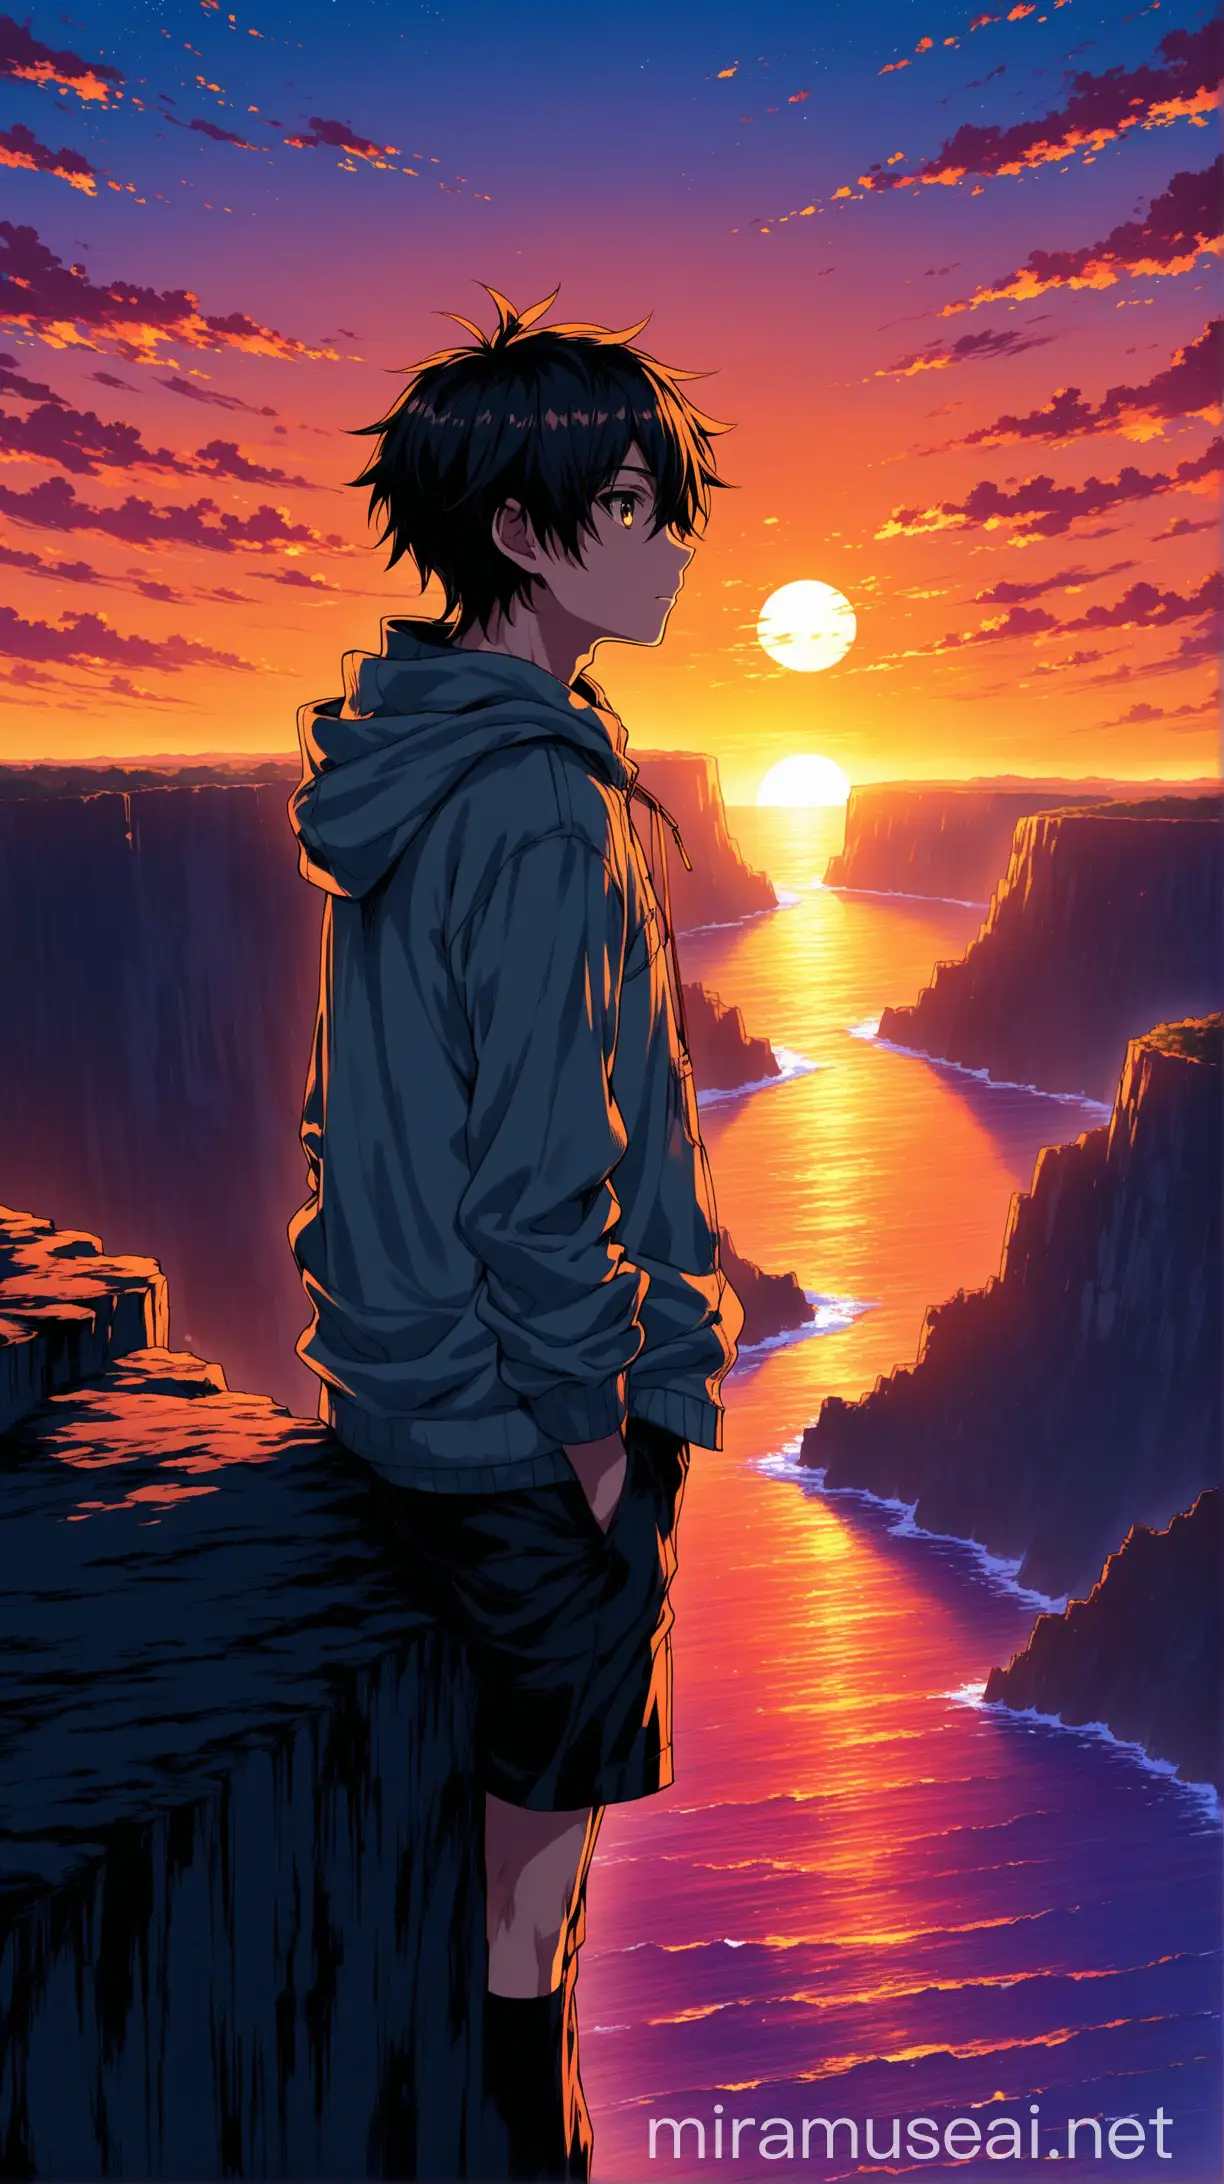 anime boy enjoys the view of sunset in edge of cliff crayon, a stark contrast to the vibrant hues bleeding across the sky 